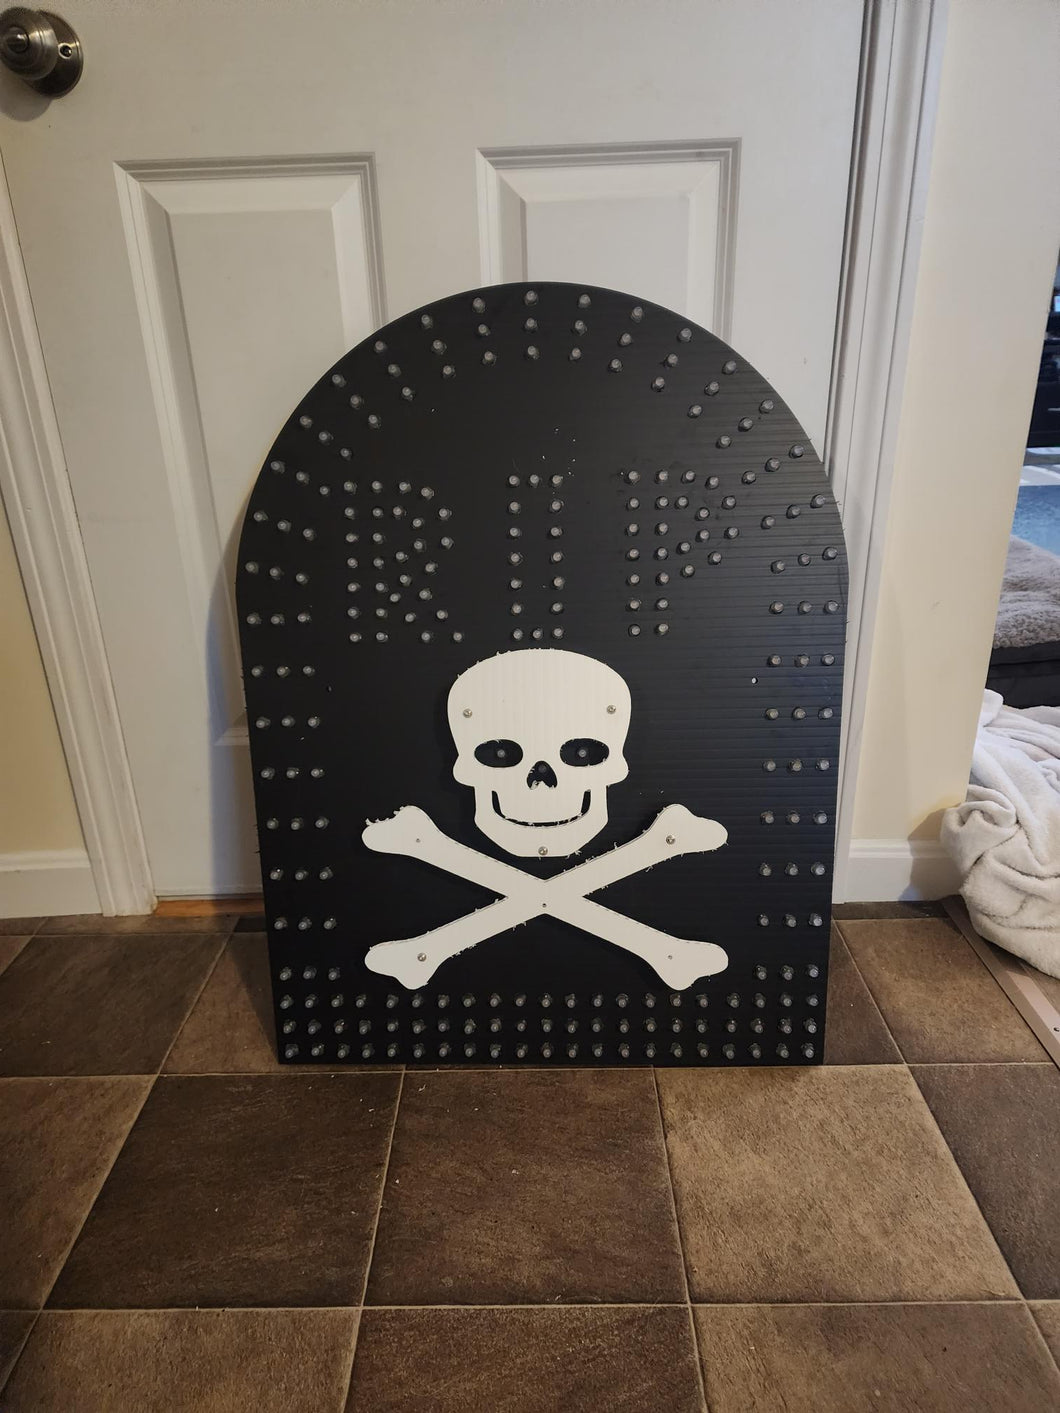 Tombstone with back lit skull and bones